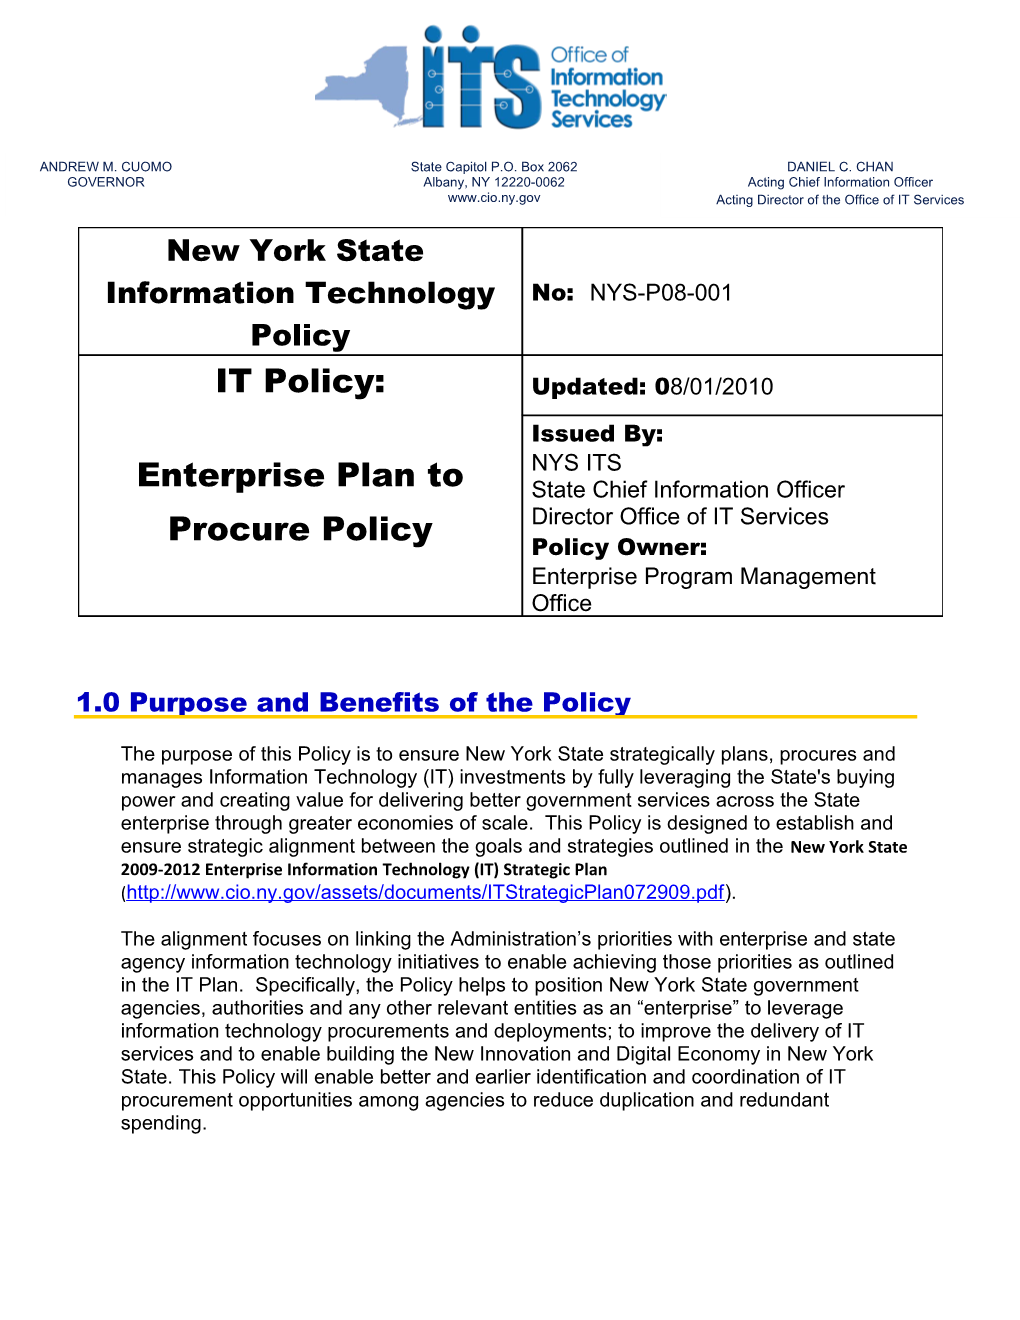 New York State IT Policy